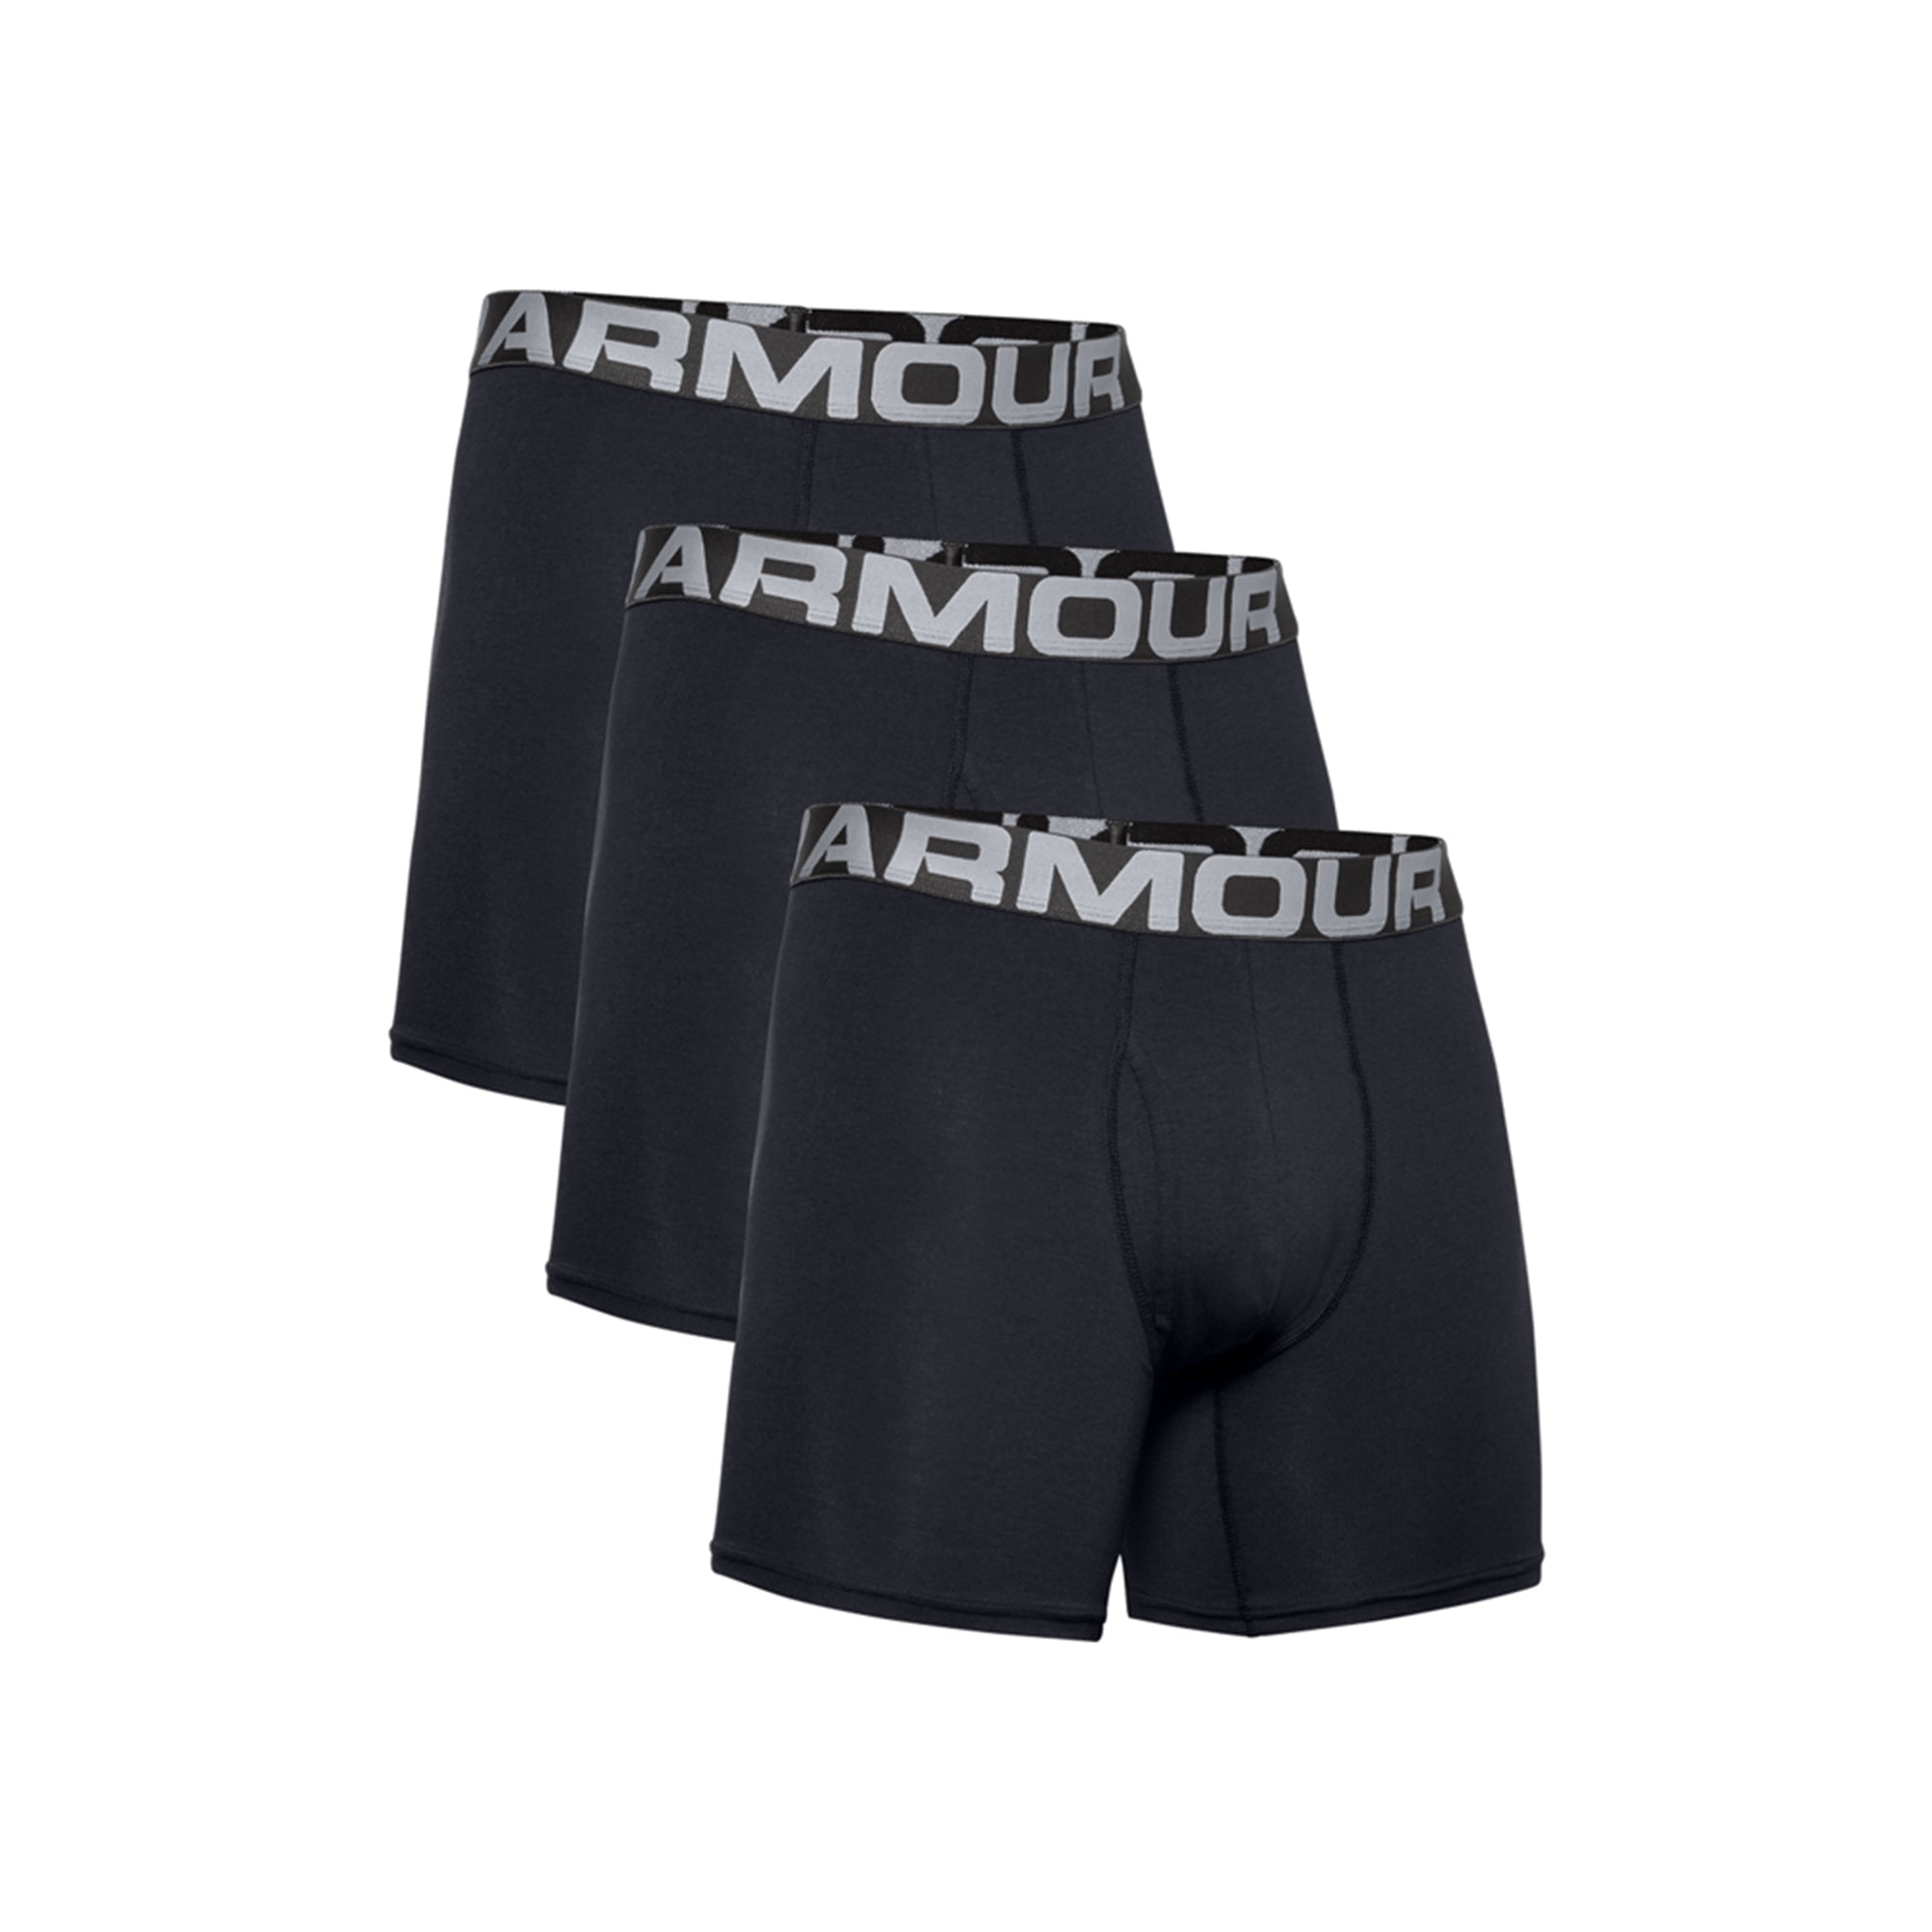 under-armour-charged-cotton-6-boxer-jock-3-pack-1363617-black-001